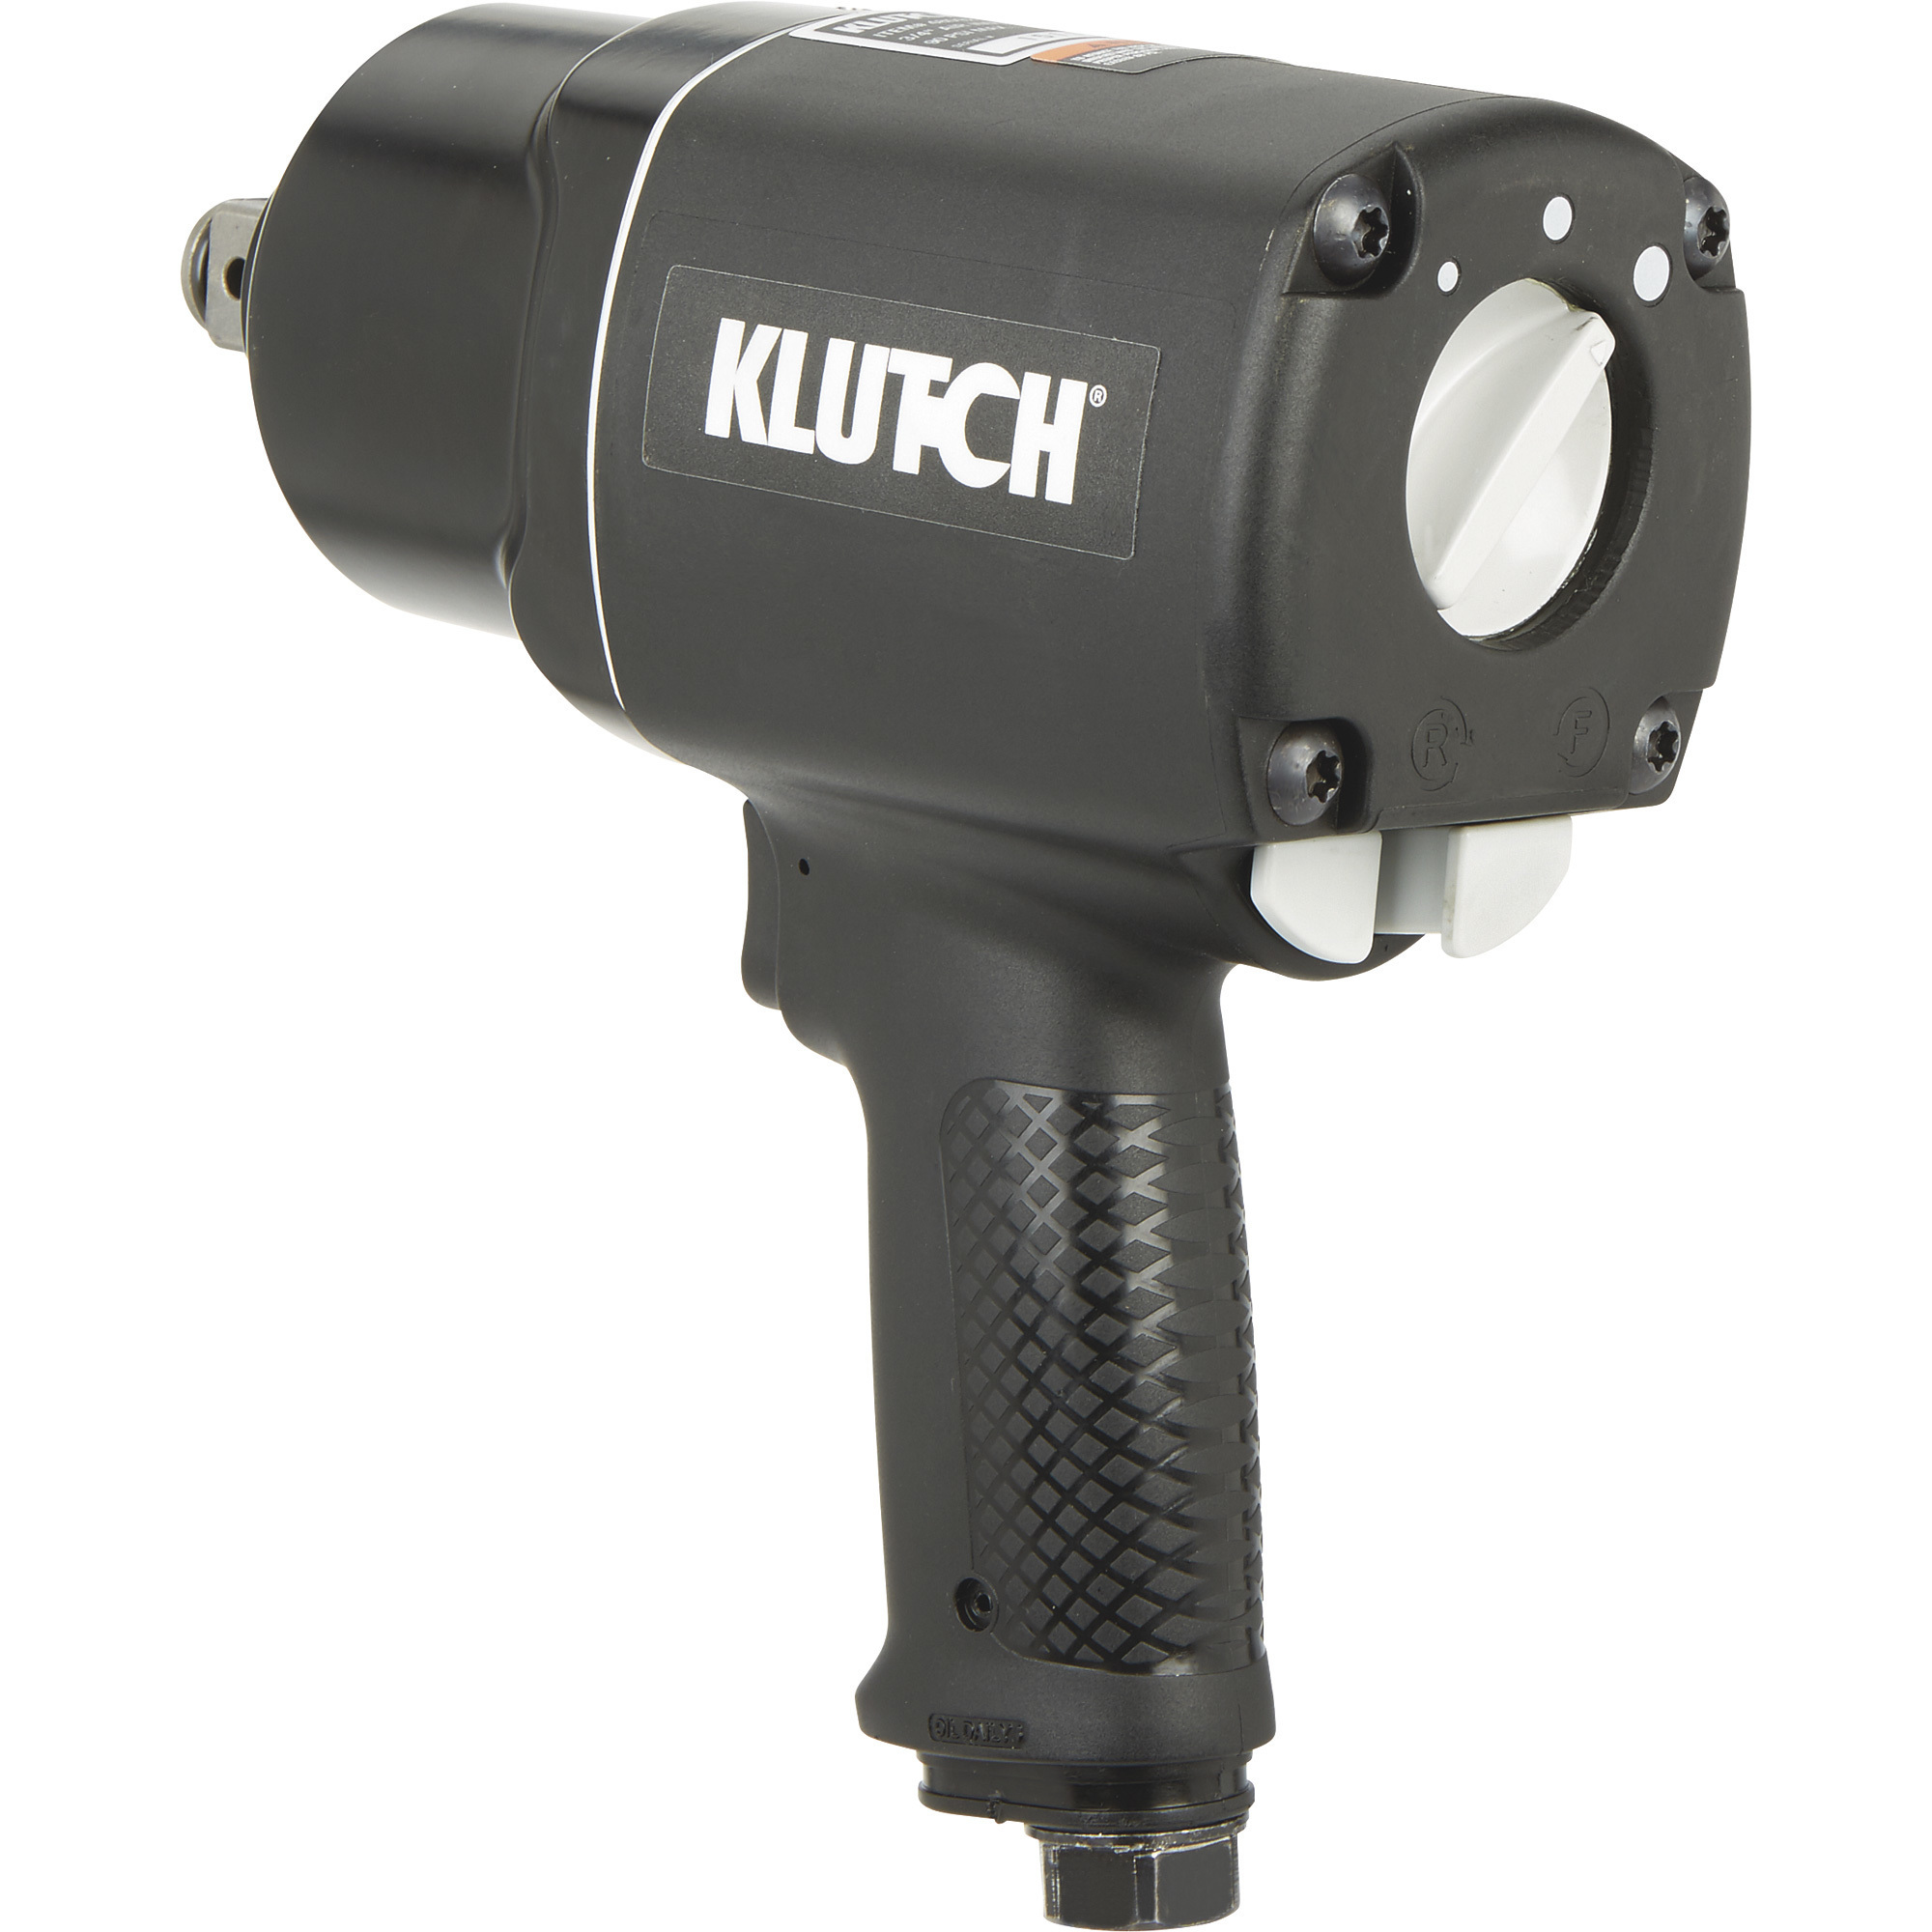  Klutch - Power Tool Parts & Accessories / Power Tools